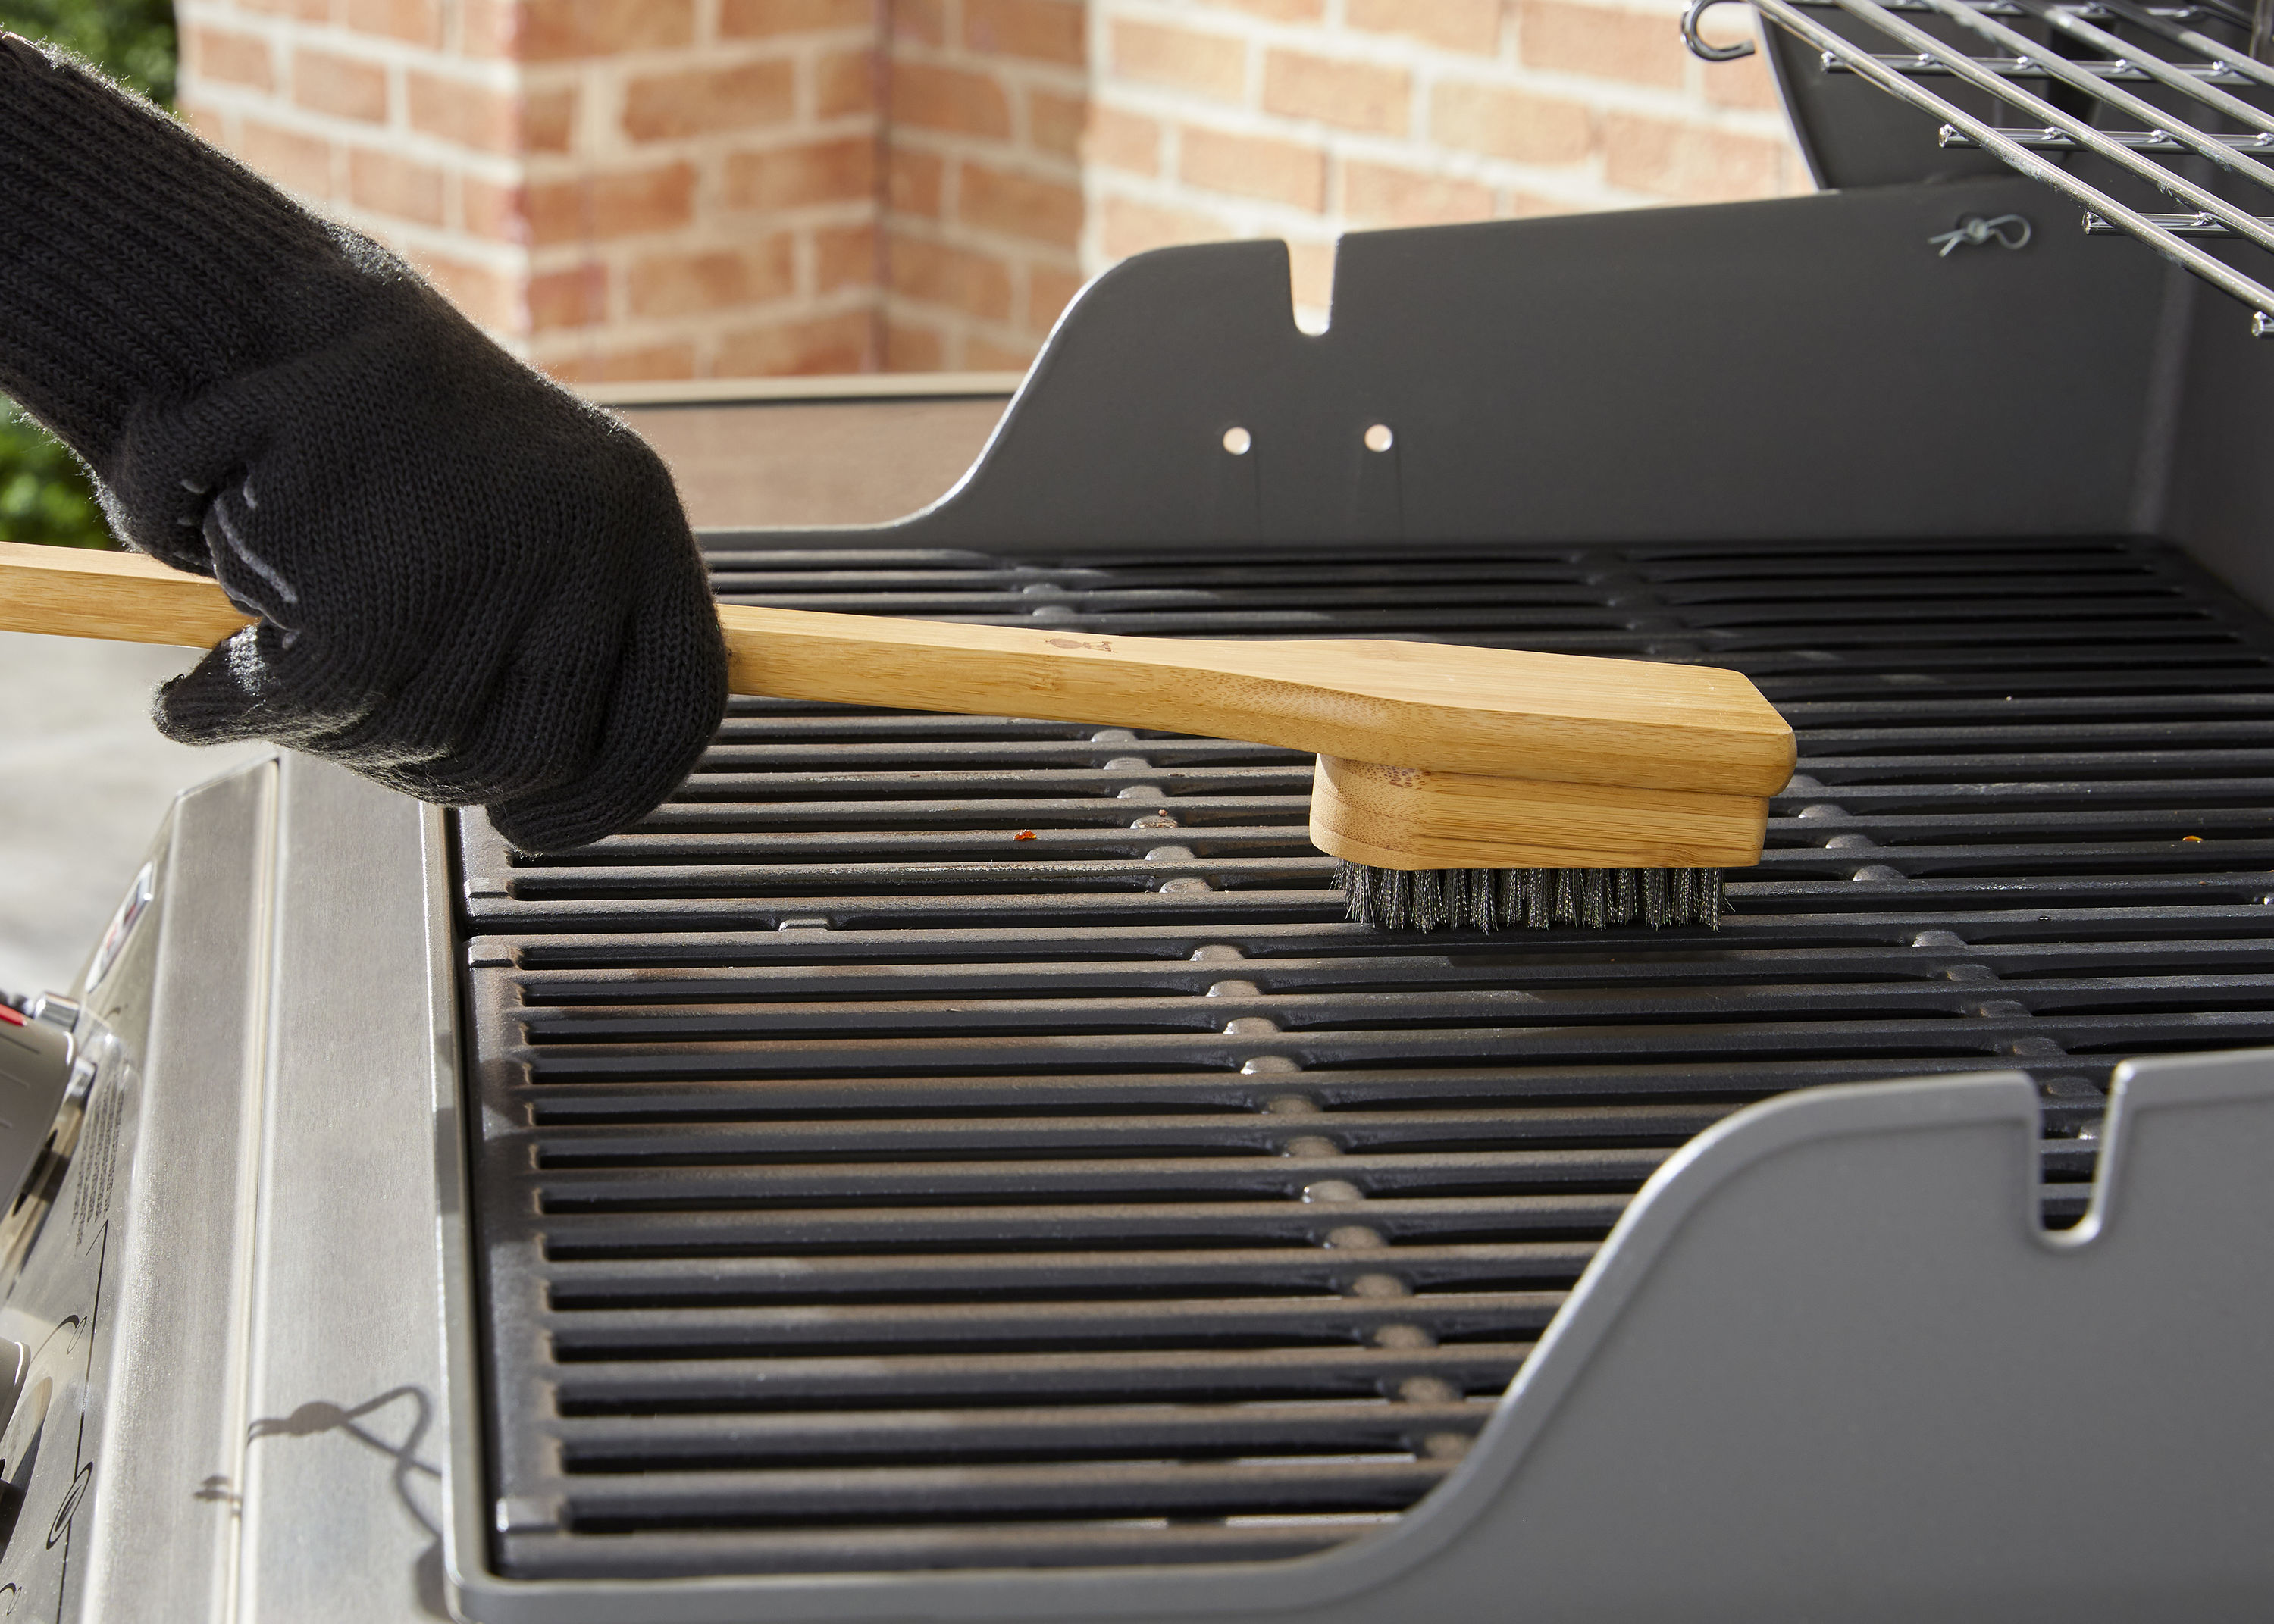 STAINLESS STEEL GAS GRILL CLEANING KIT WEBER